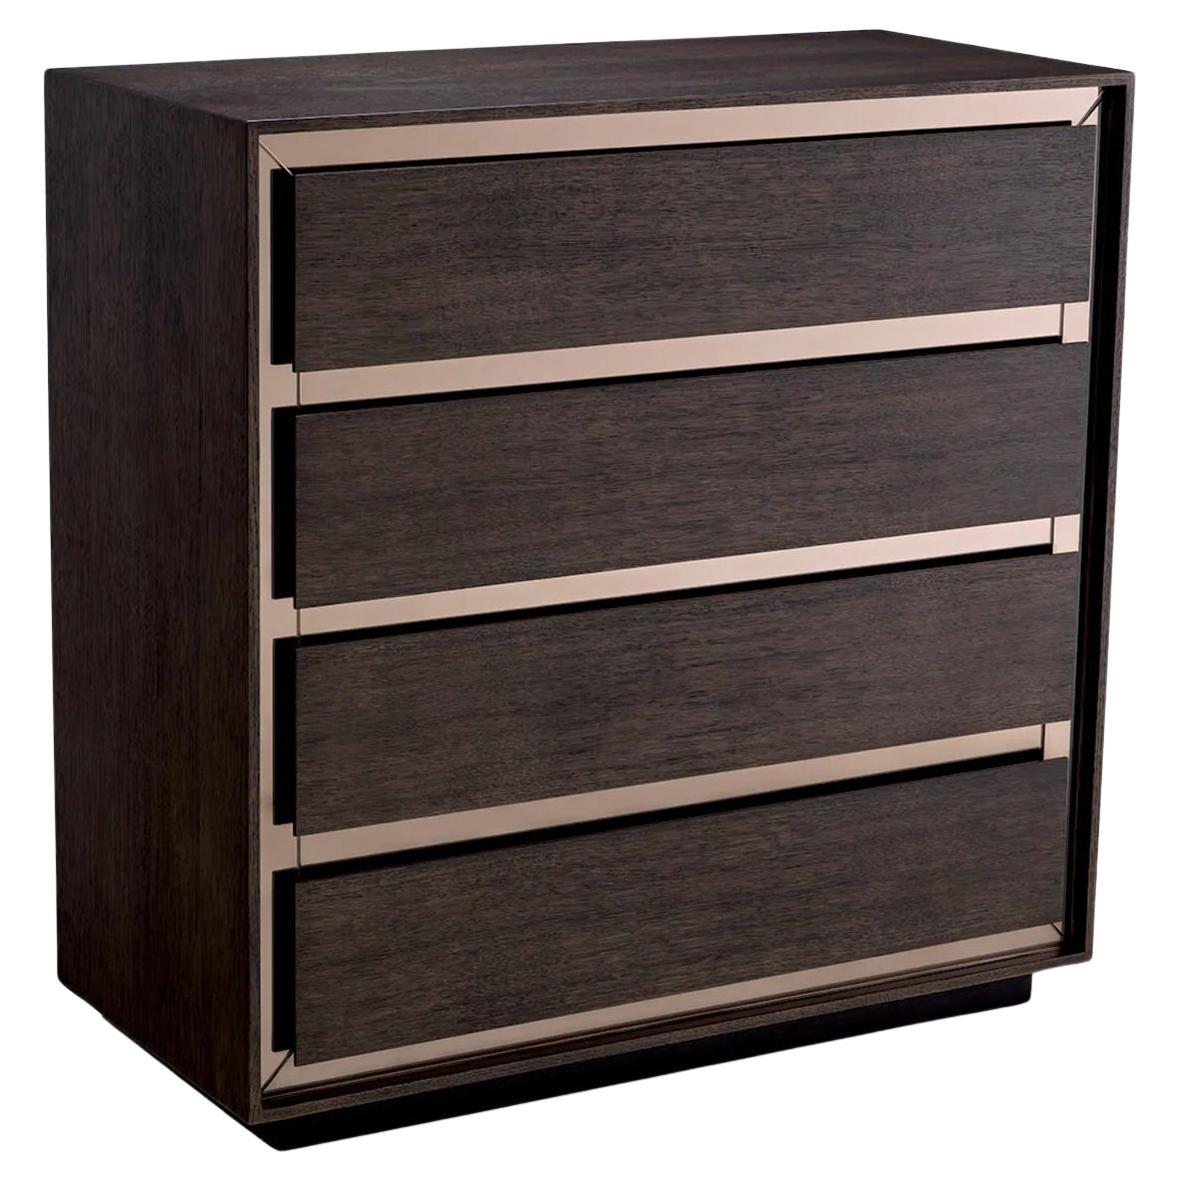 Eliom Chest of Drawers For Sale